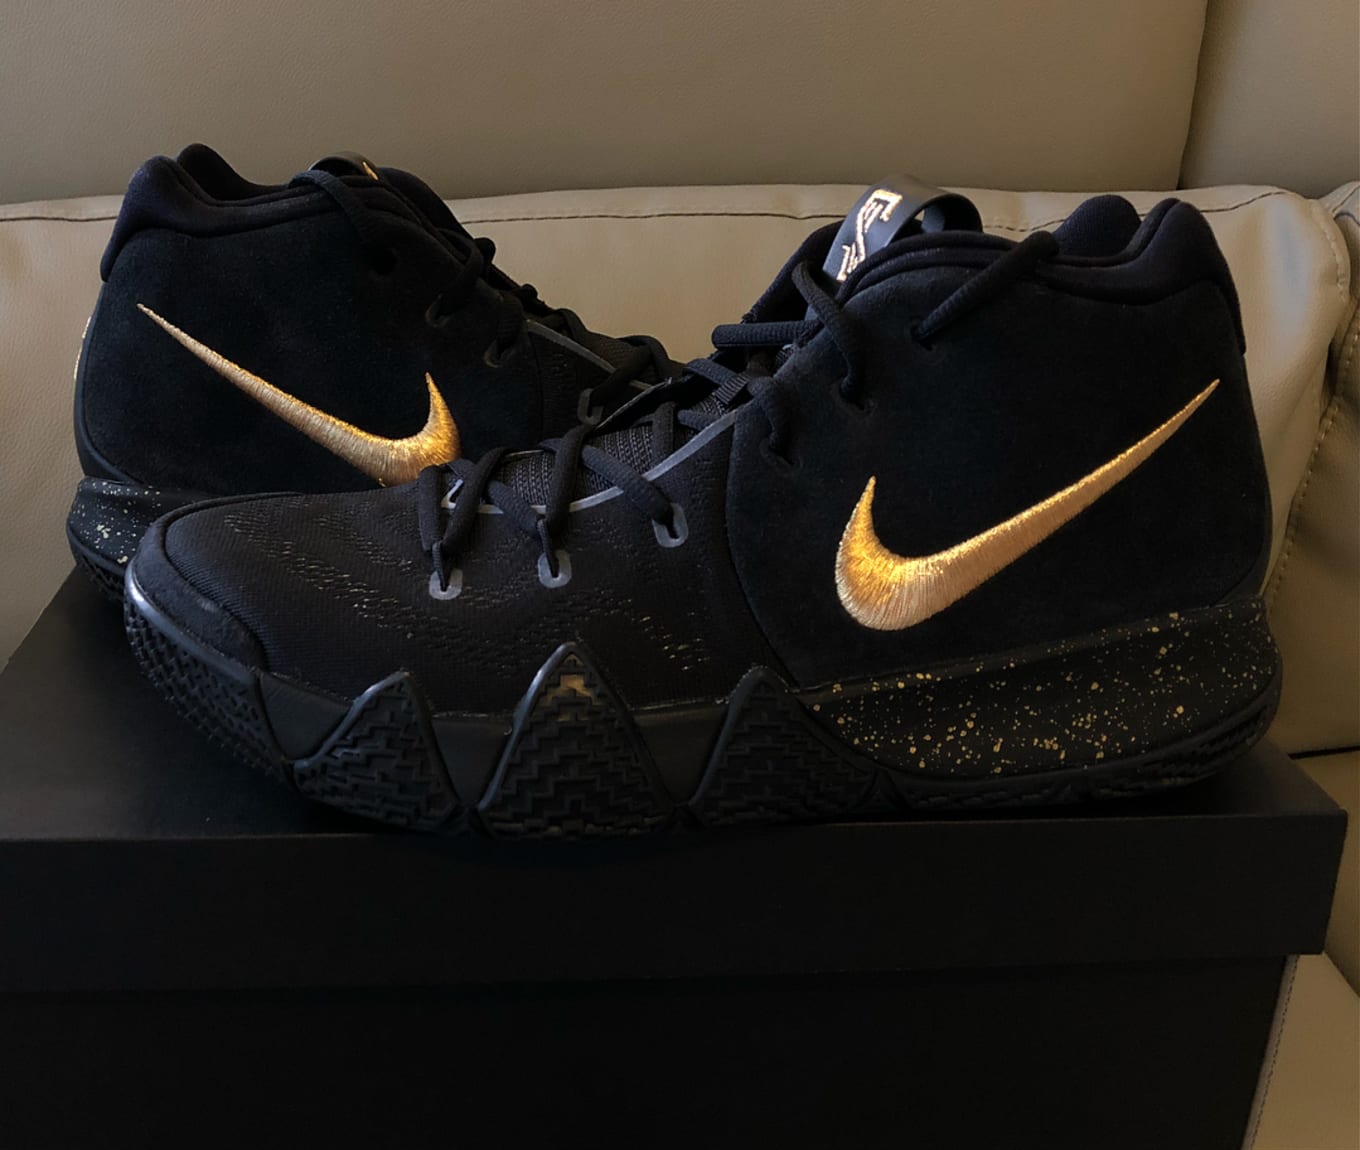 kyrie 4 gold and black